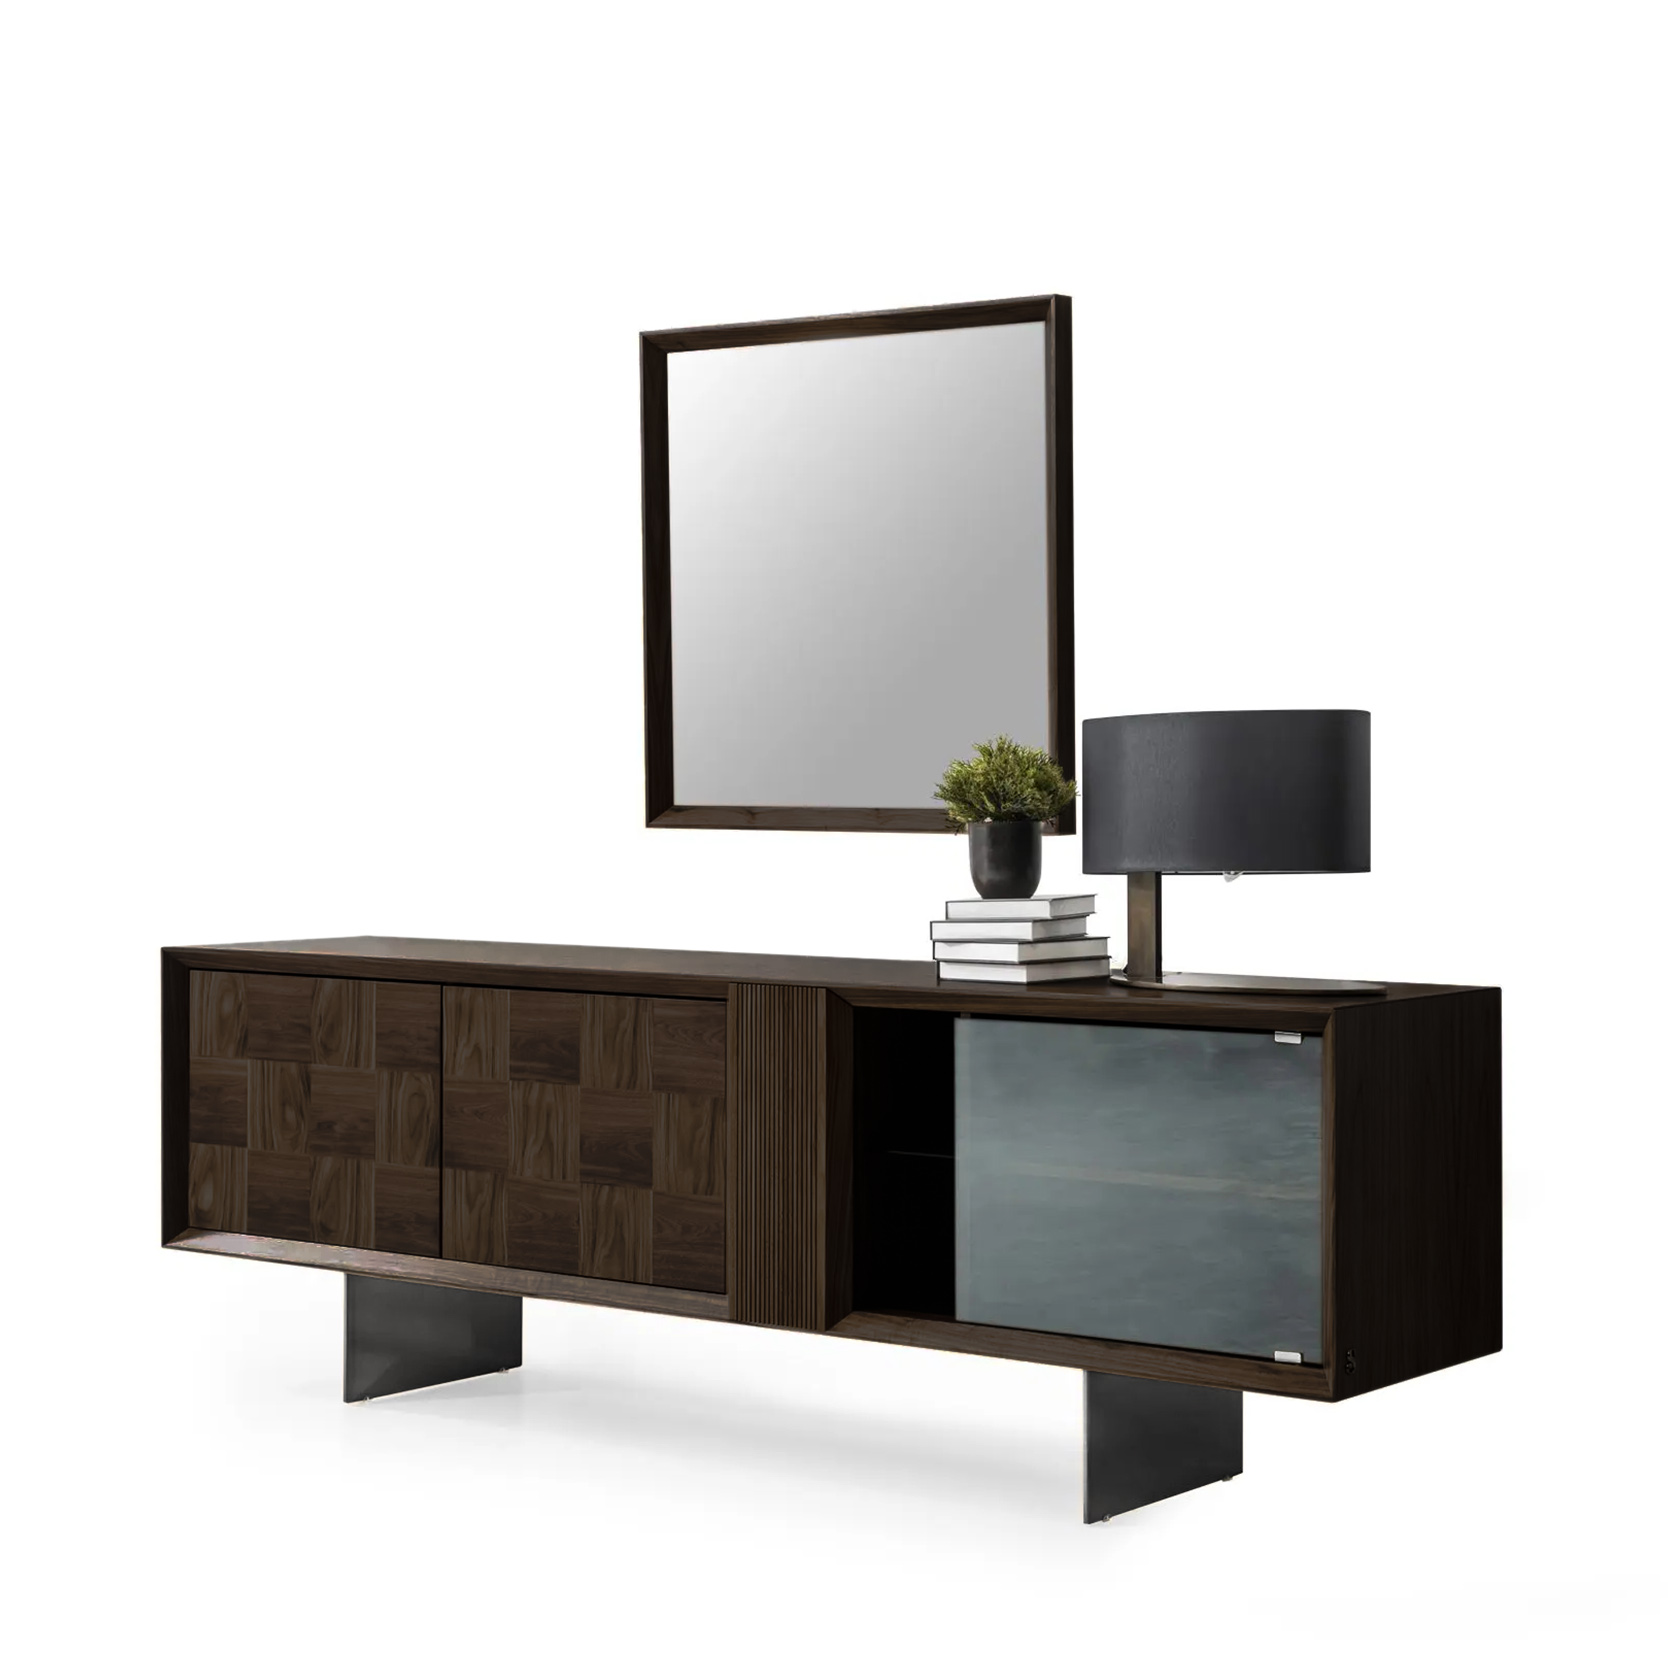 Square mirror included with the Heritage Console Table